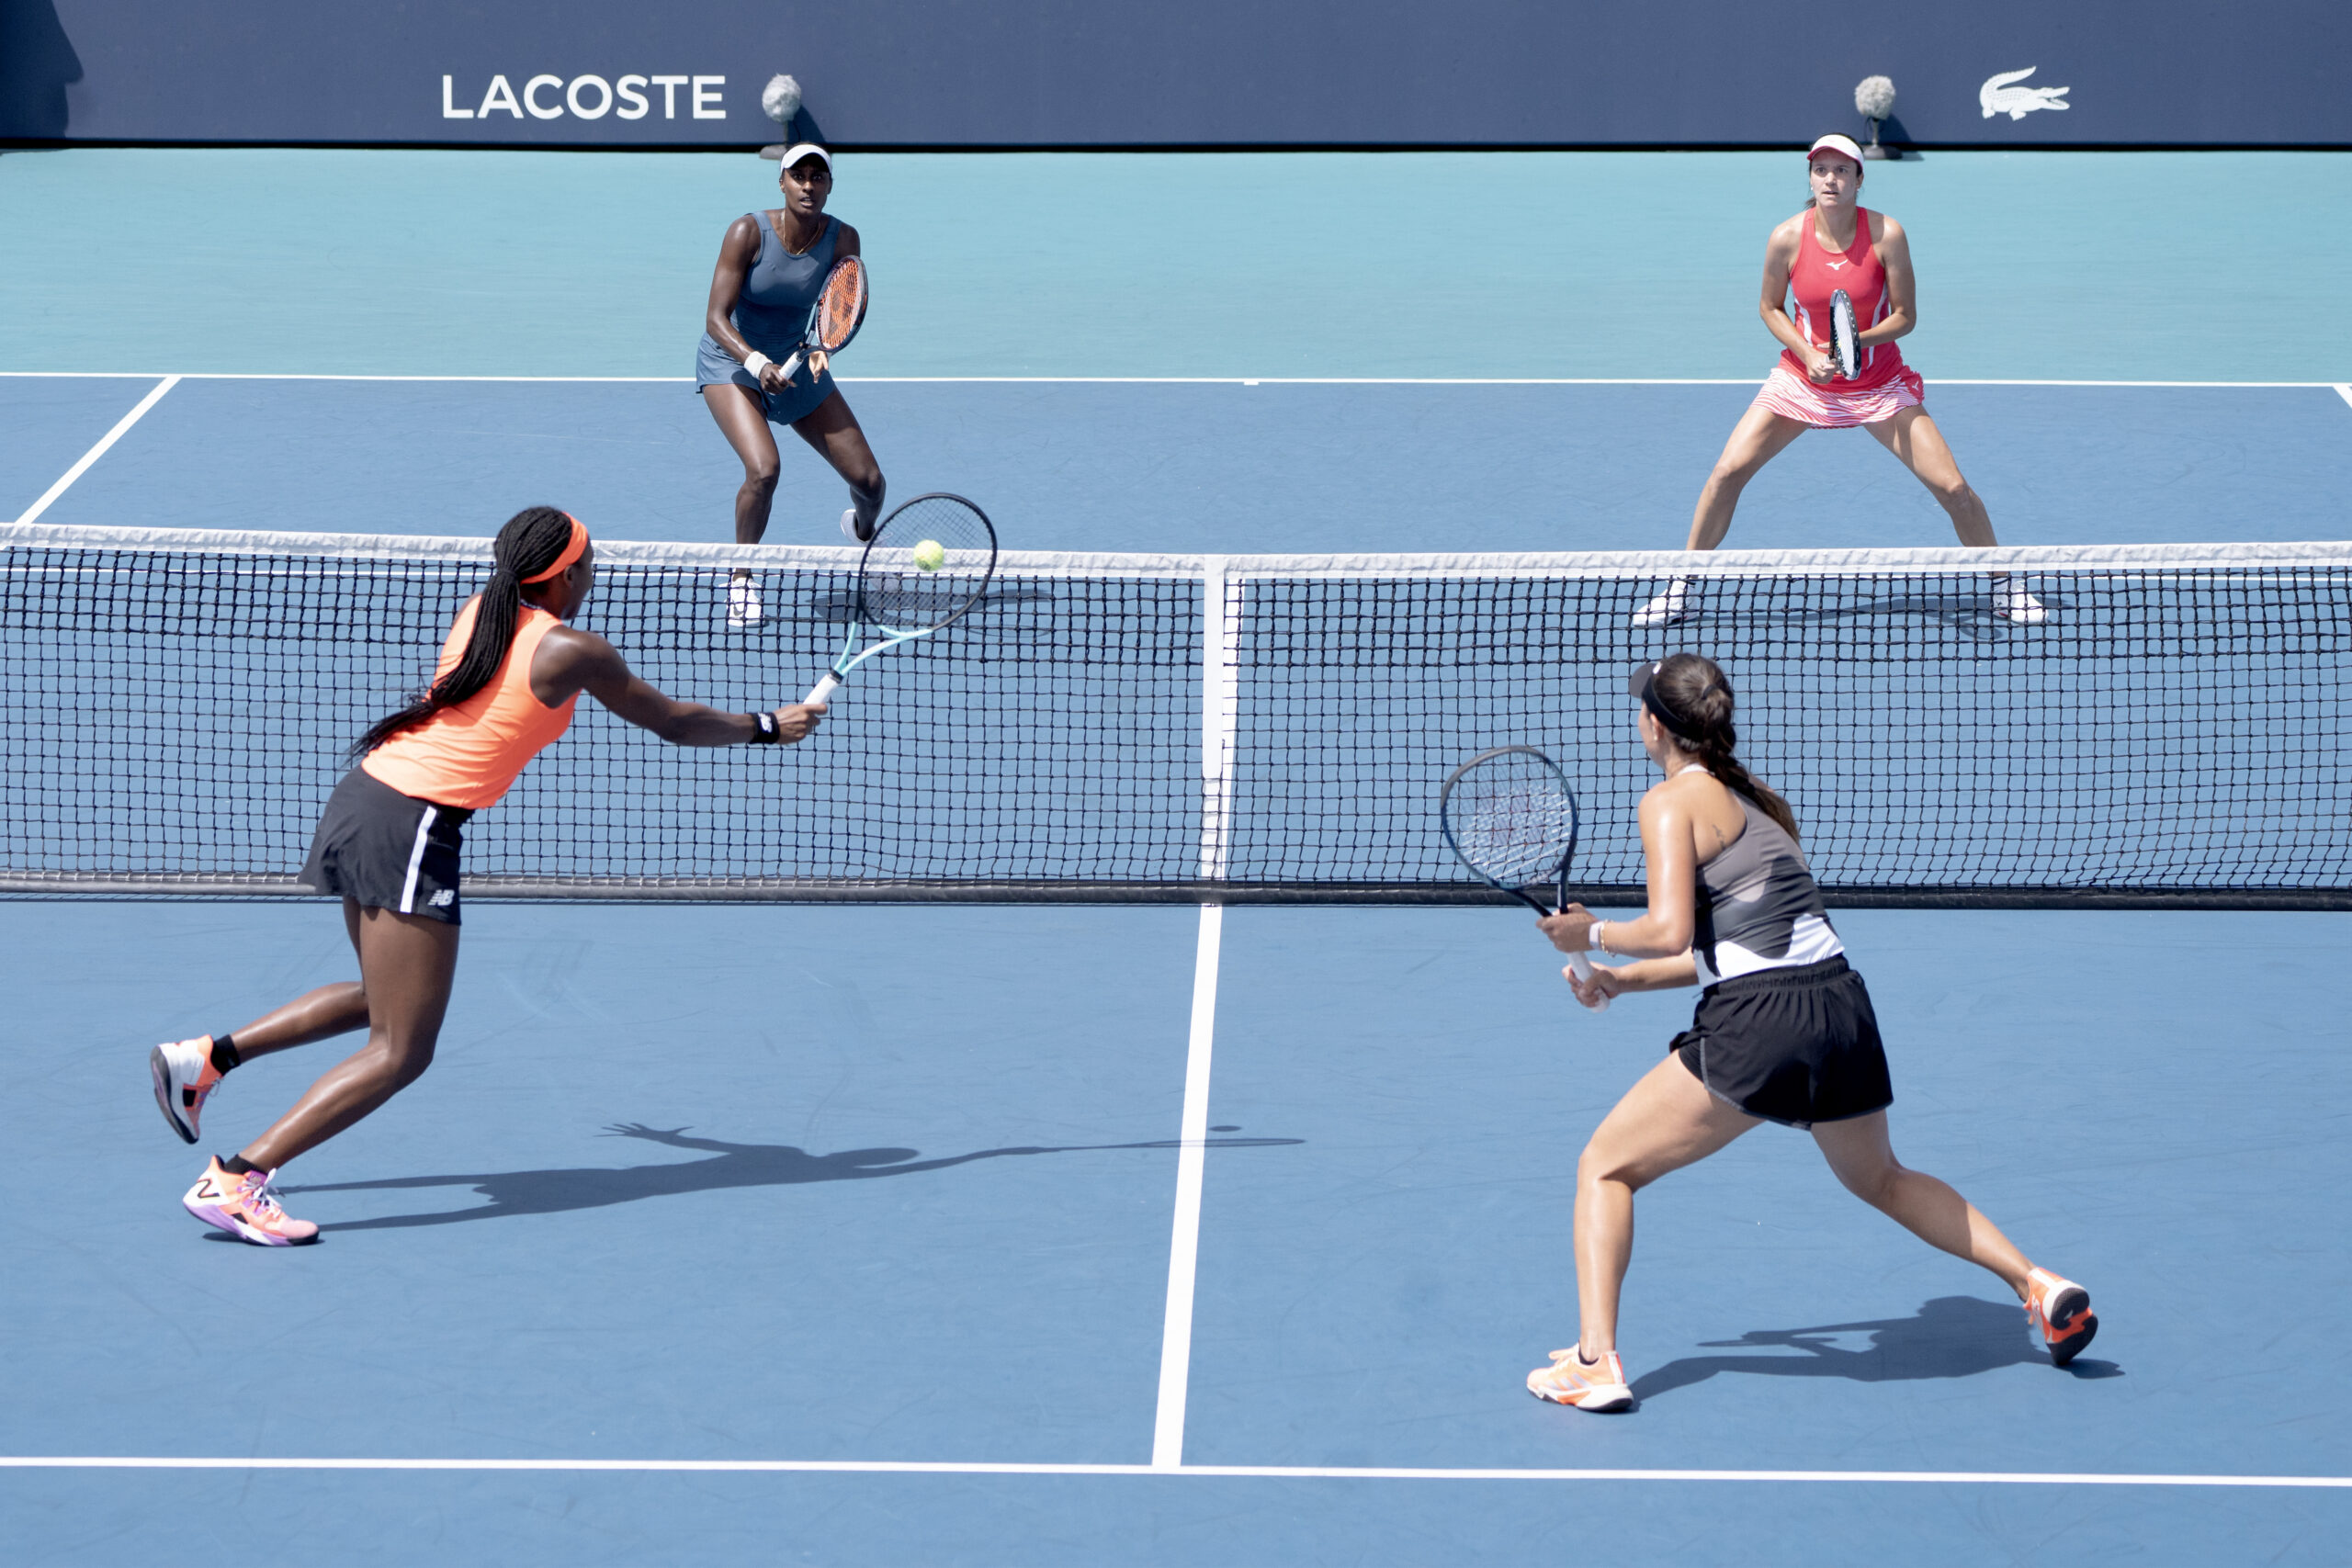 The teams of Muhammad,/Dalinina and Gauff/Pegula battle it out at the 2023 Miami Open in Miami Gardens, Florida.